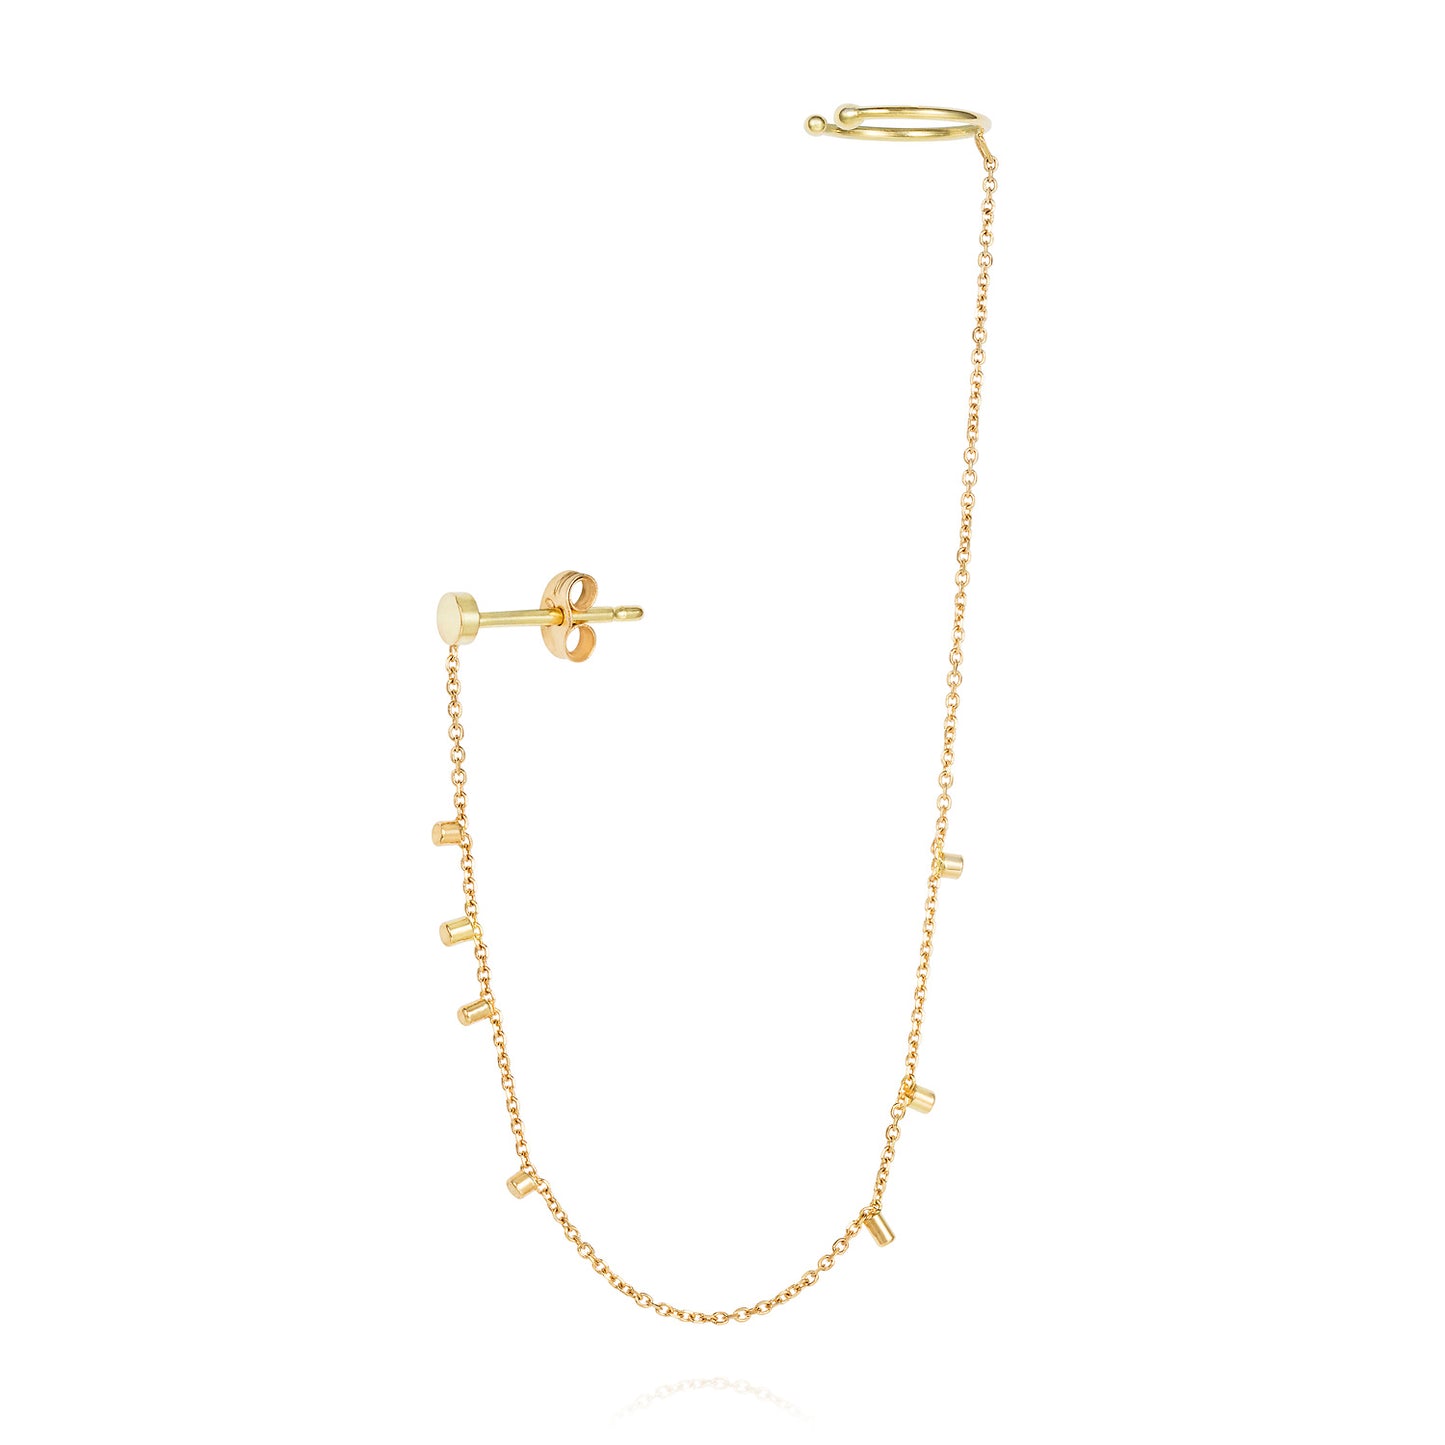 This modern 18ct yellow gold stud to cuff earring is connected by fine chain sprinkled with a shimmering of gold embellishments.